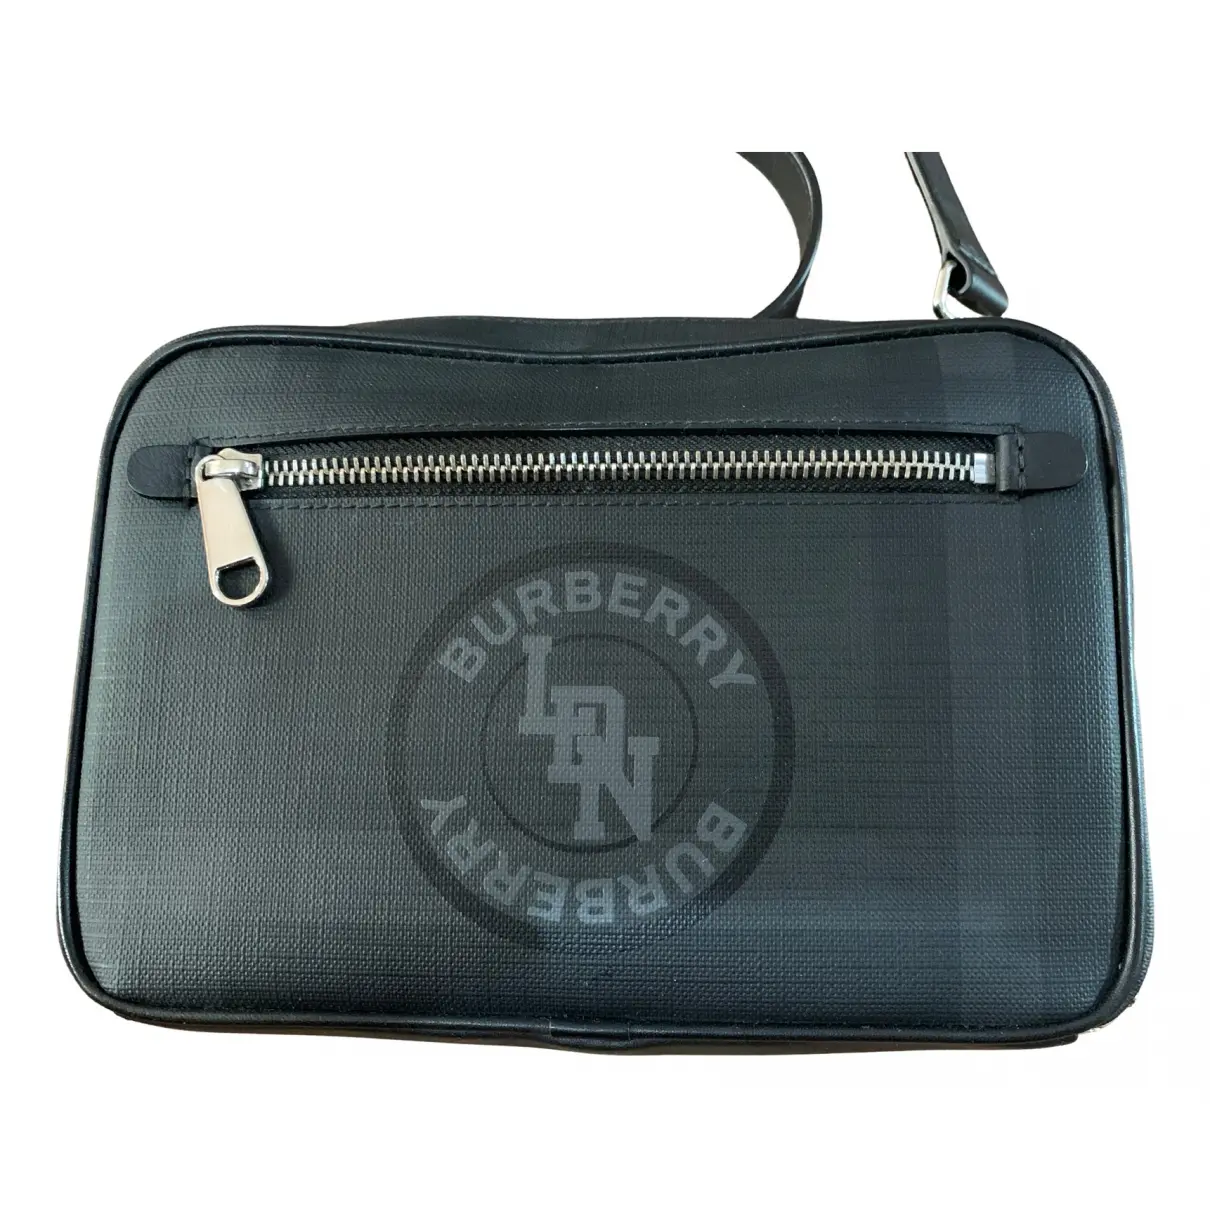 Patent leather bag Burberry